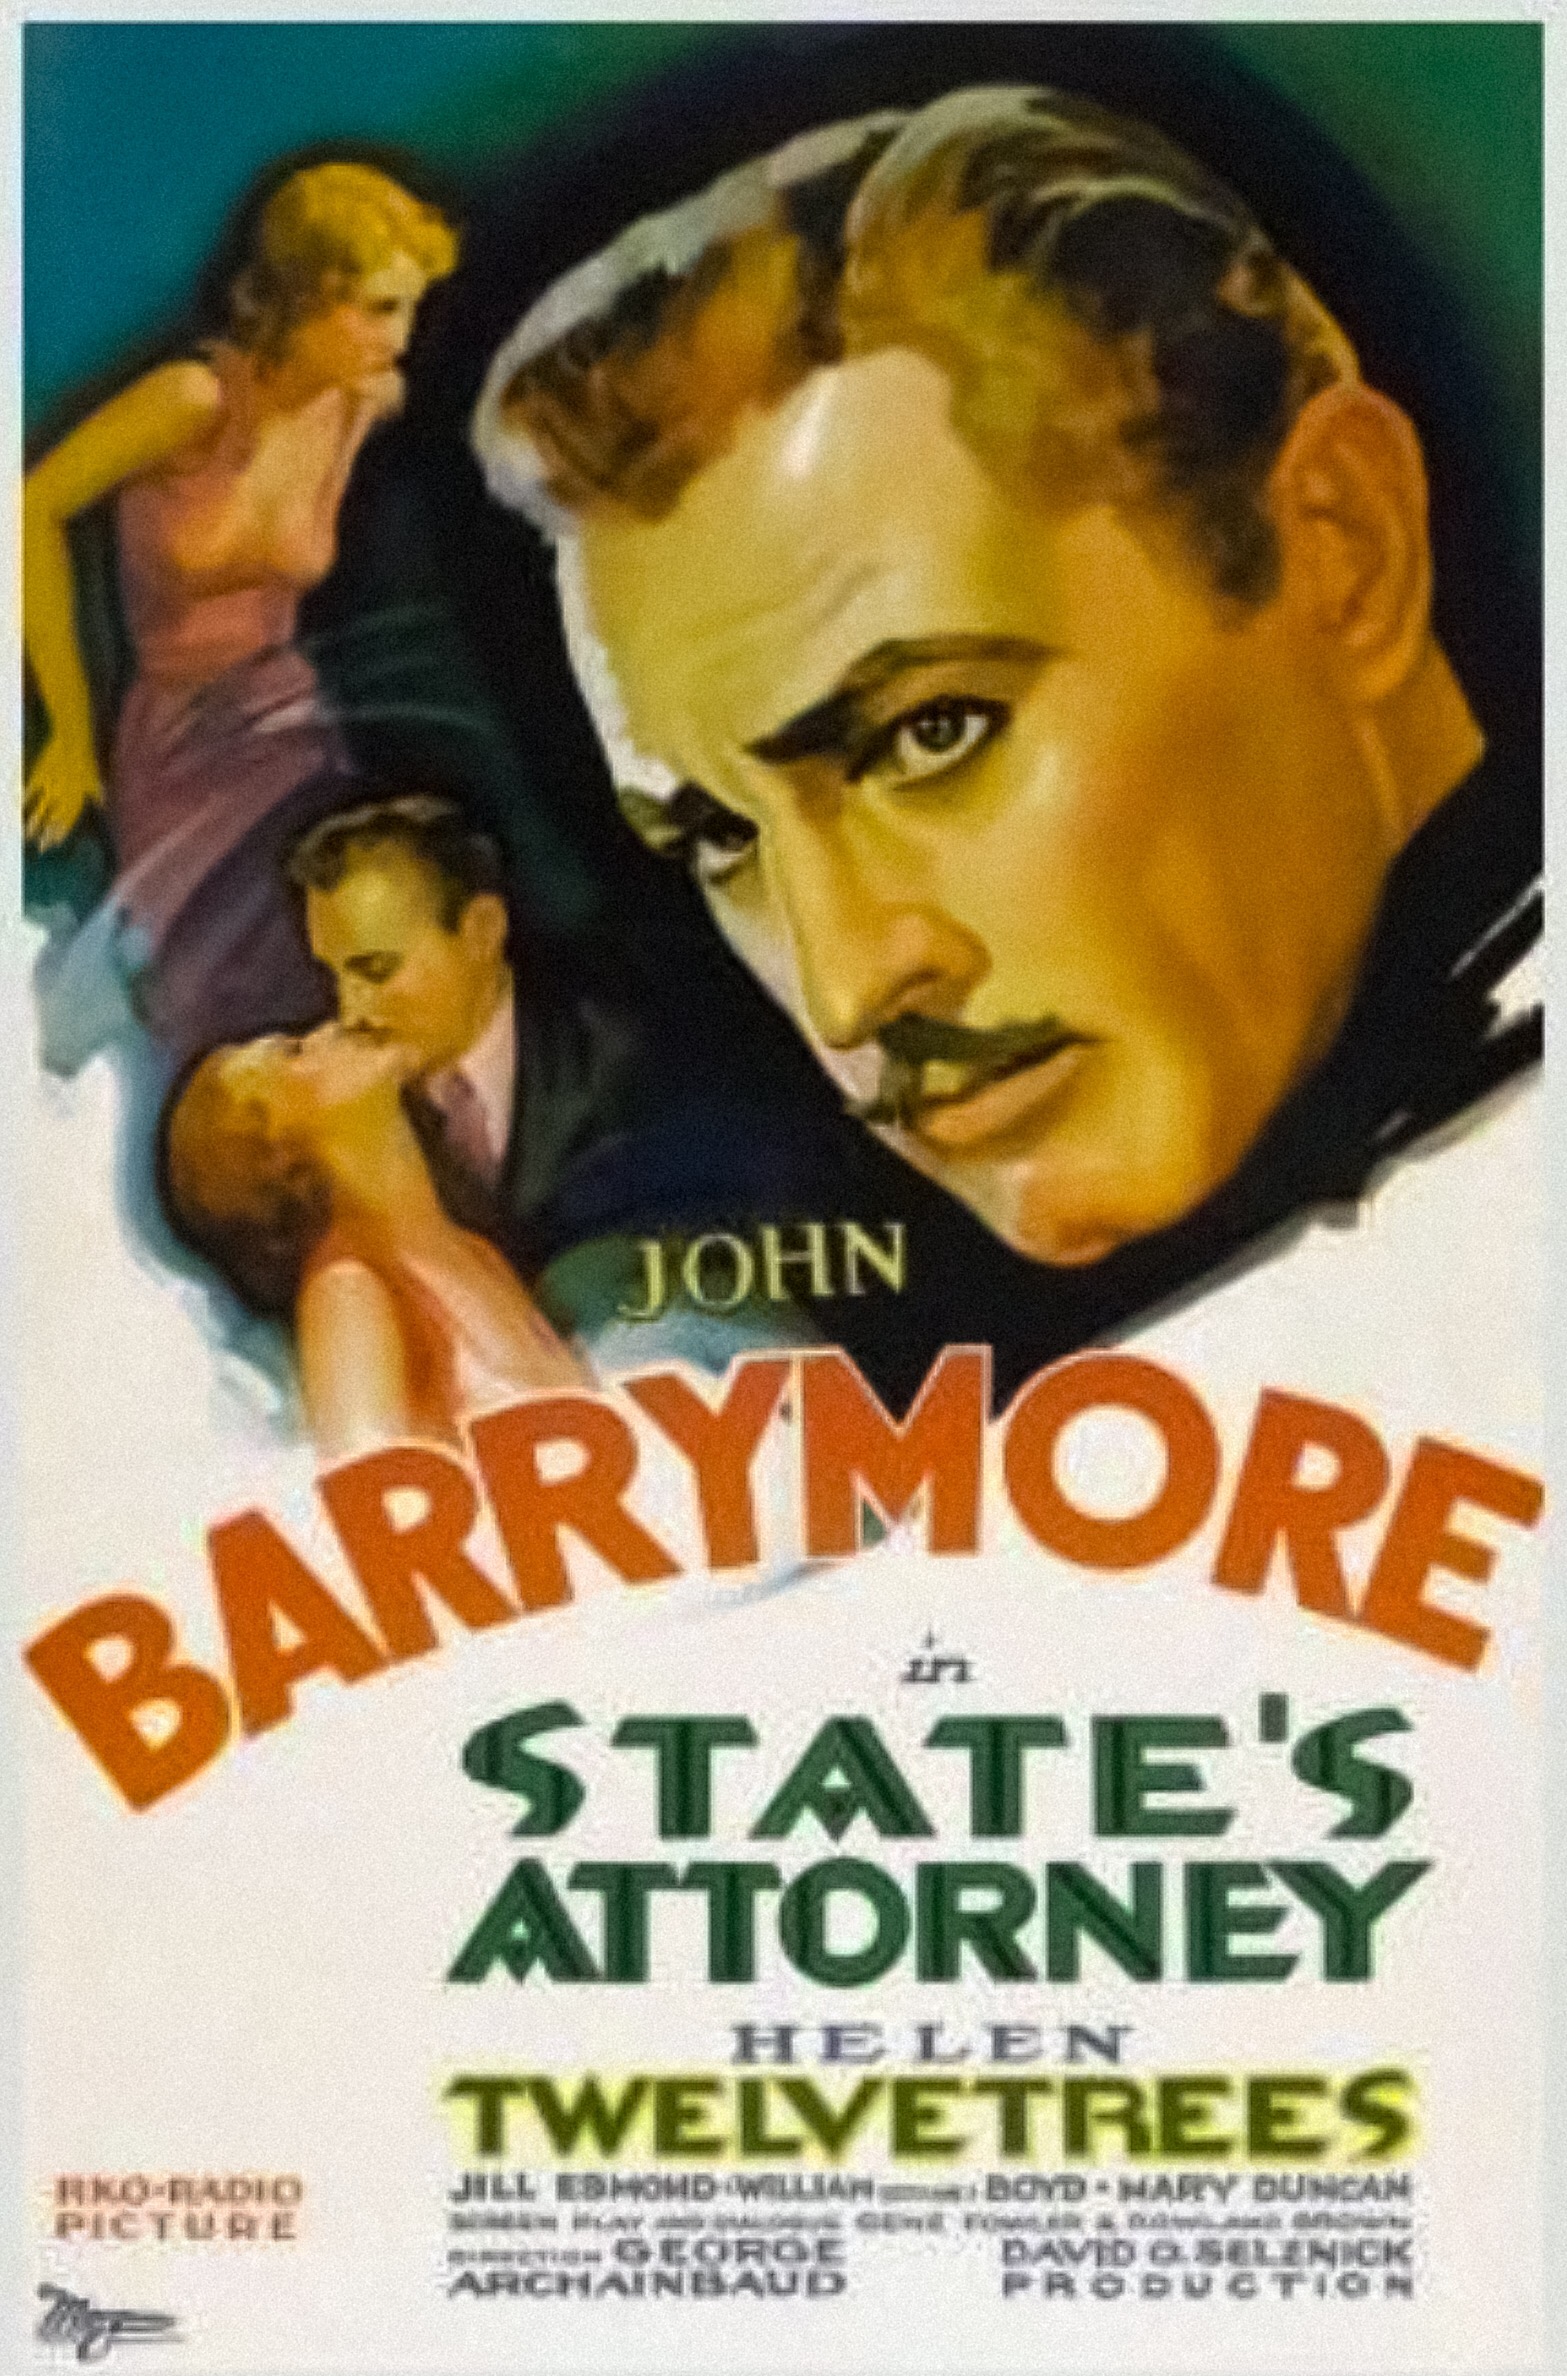 STATE'S ATTORNEY (1932)